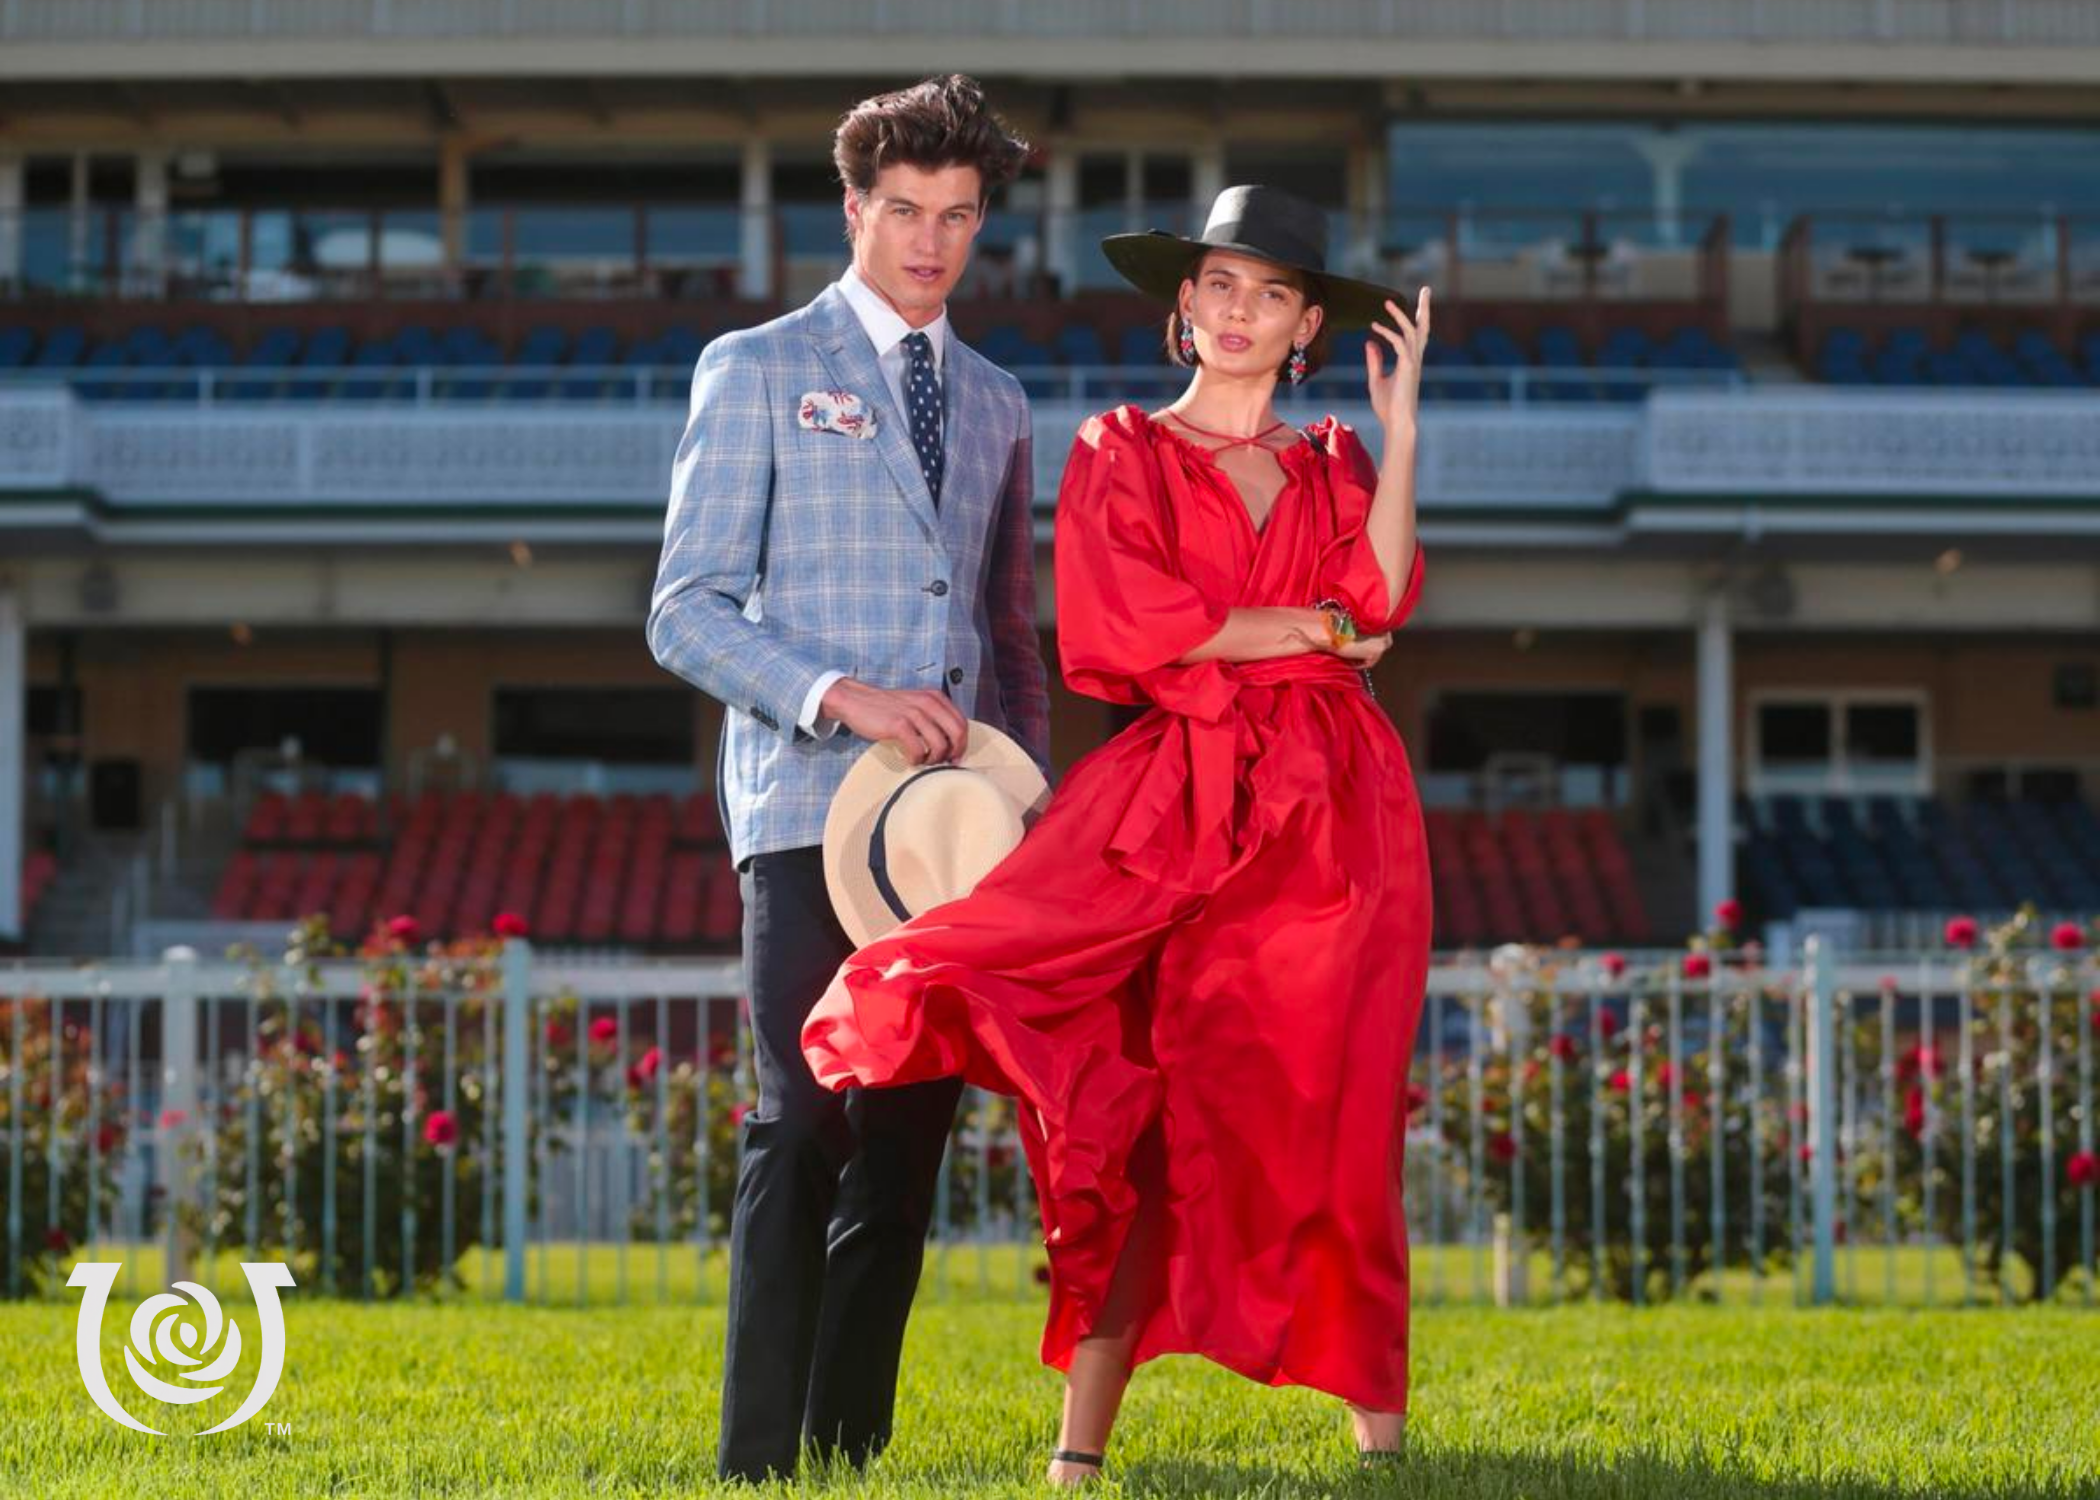 Kentucky Derby Style. How one can Costume, Hats, Outfits and Extra